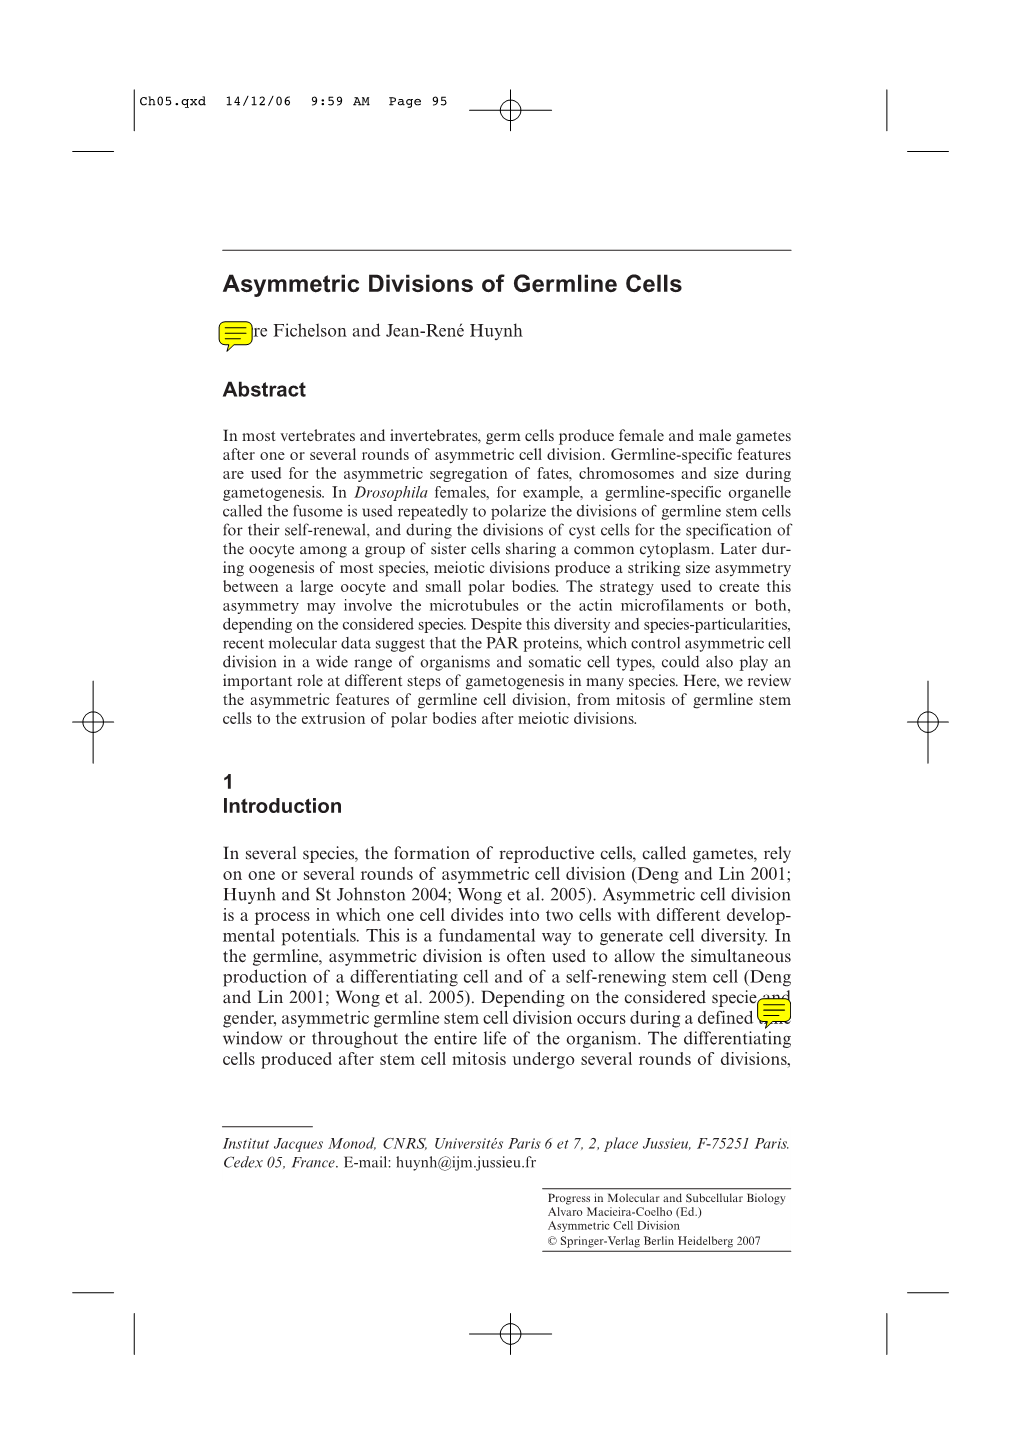 Asymmetric Divisions of Germline Cells